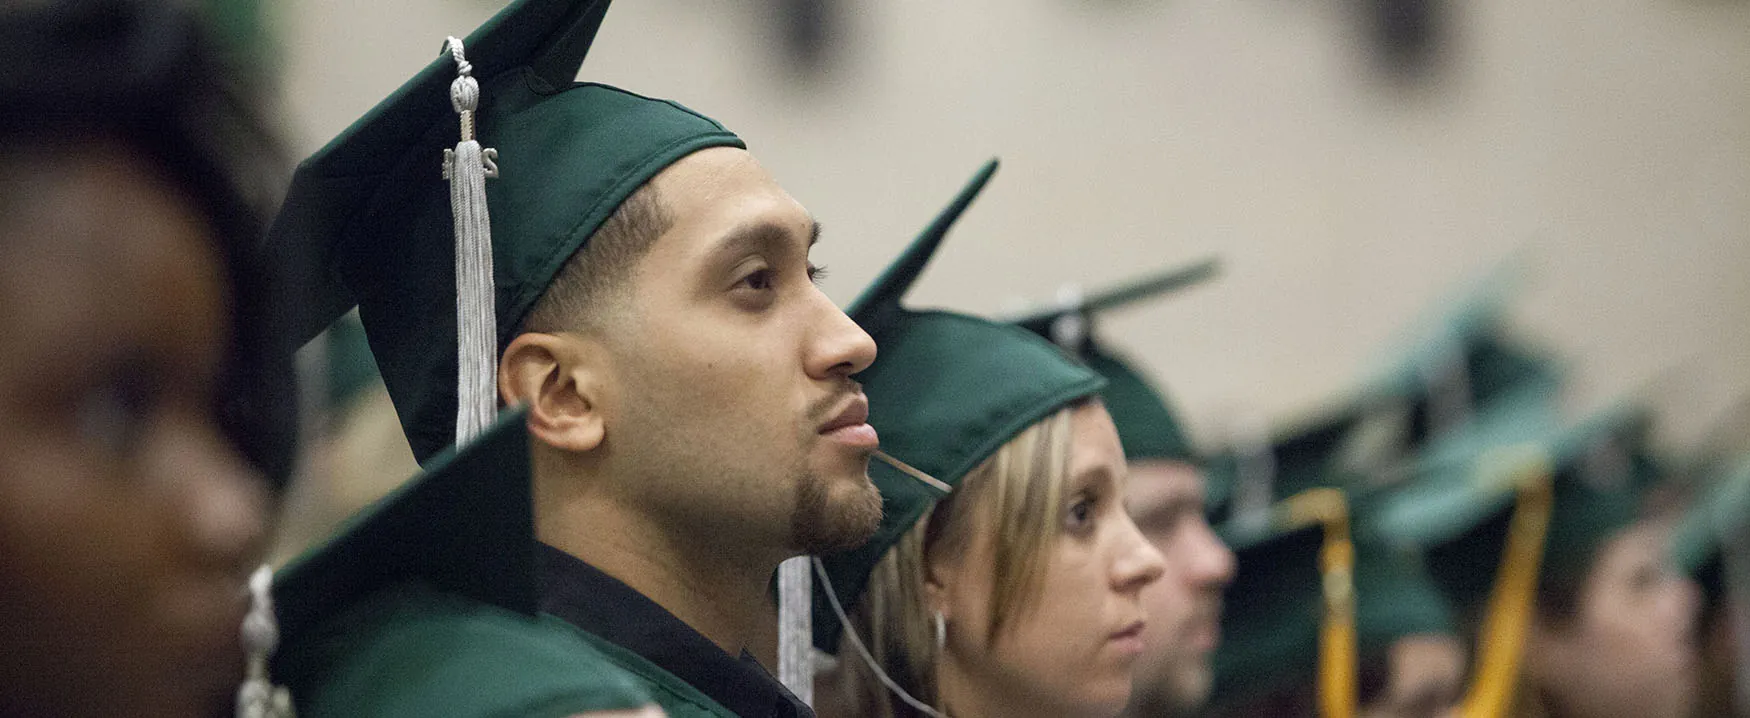 Several students wearing caps and gowns listen attentively at a graduation ceremony.